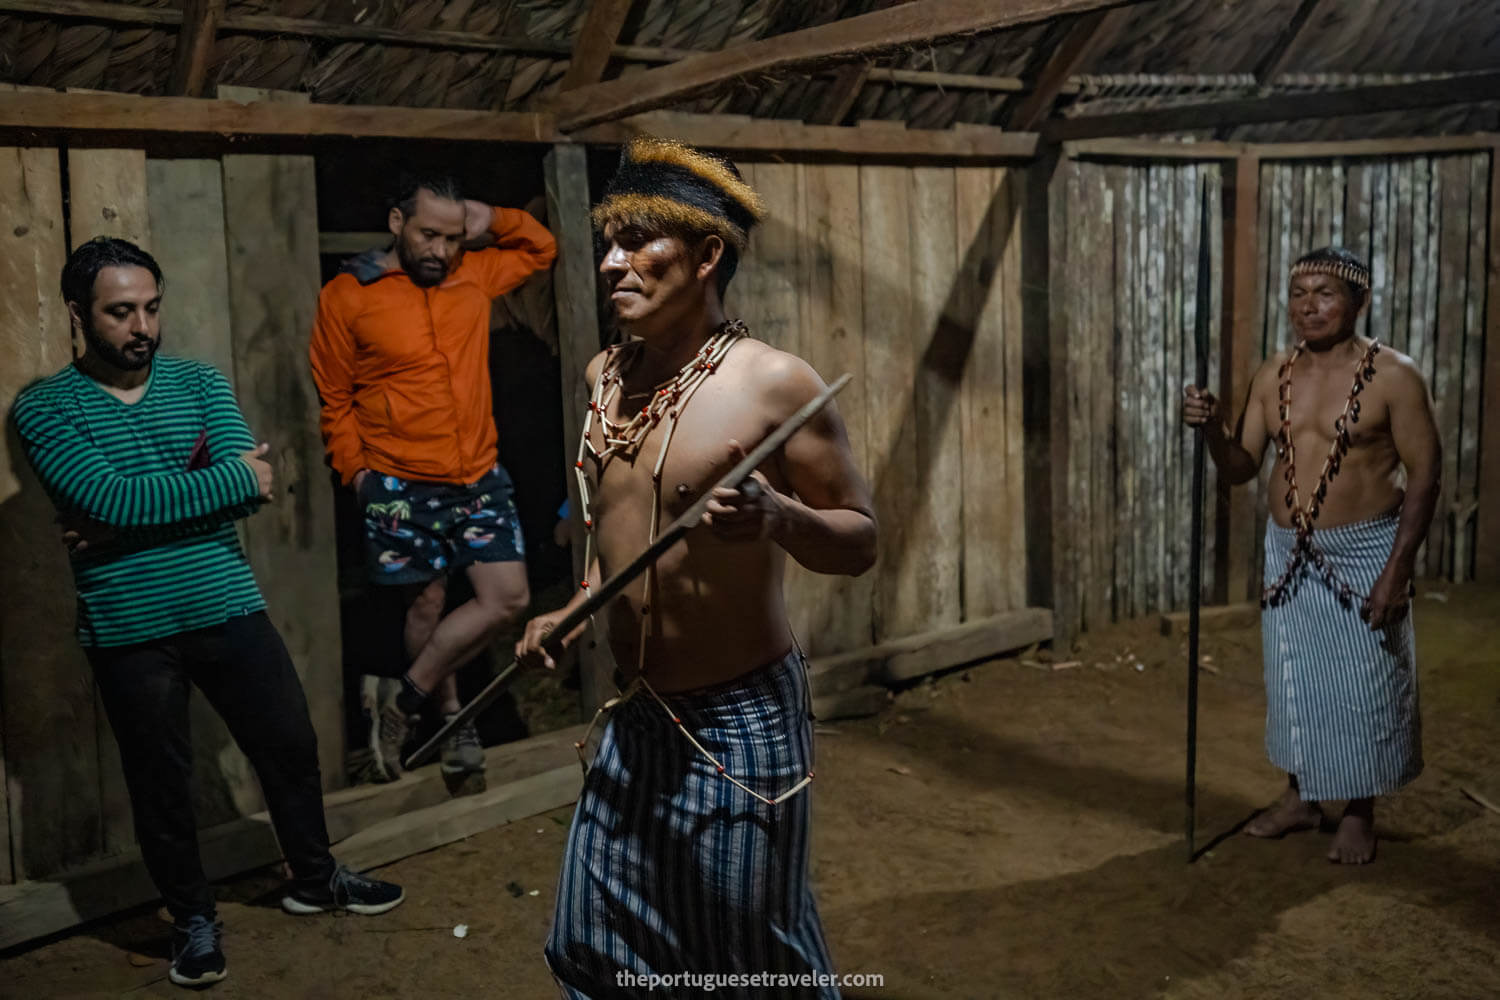 Jimmy and his father in full Shuar attire, dancing and speaking his language.